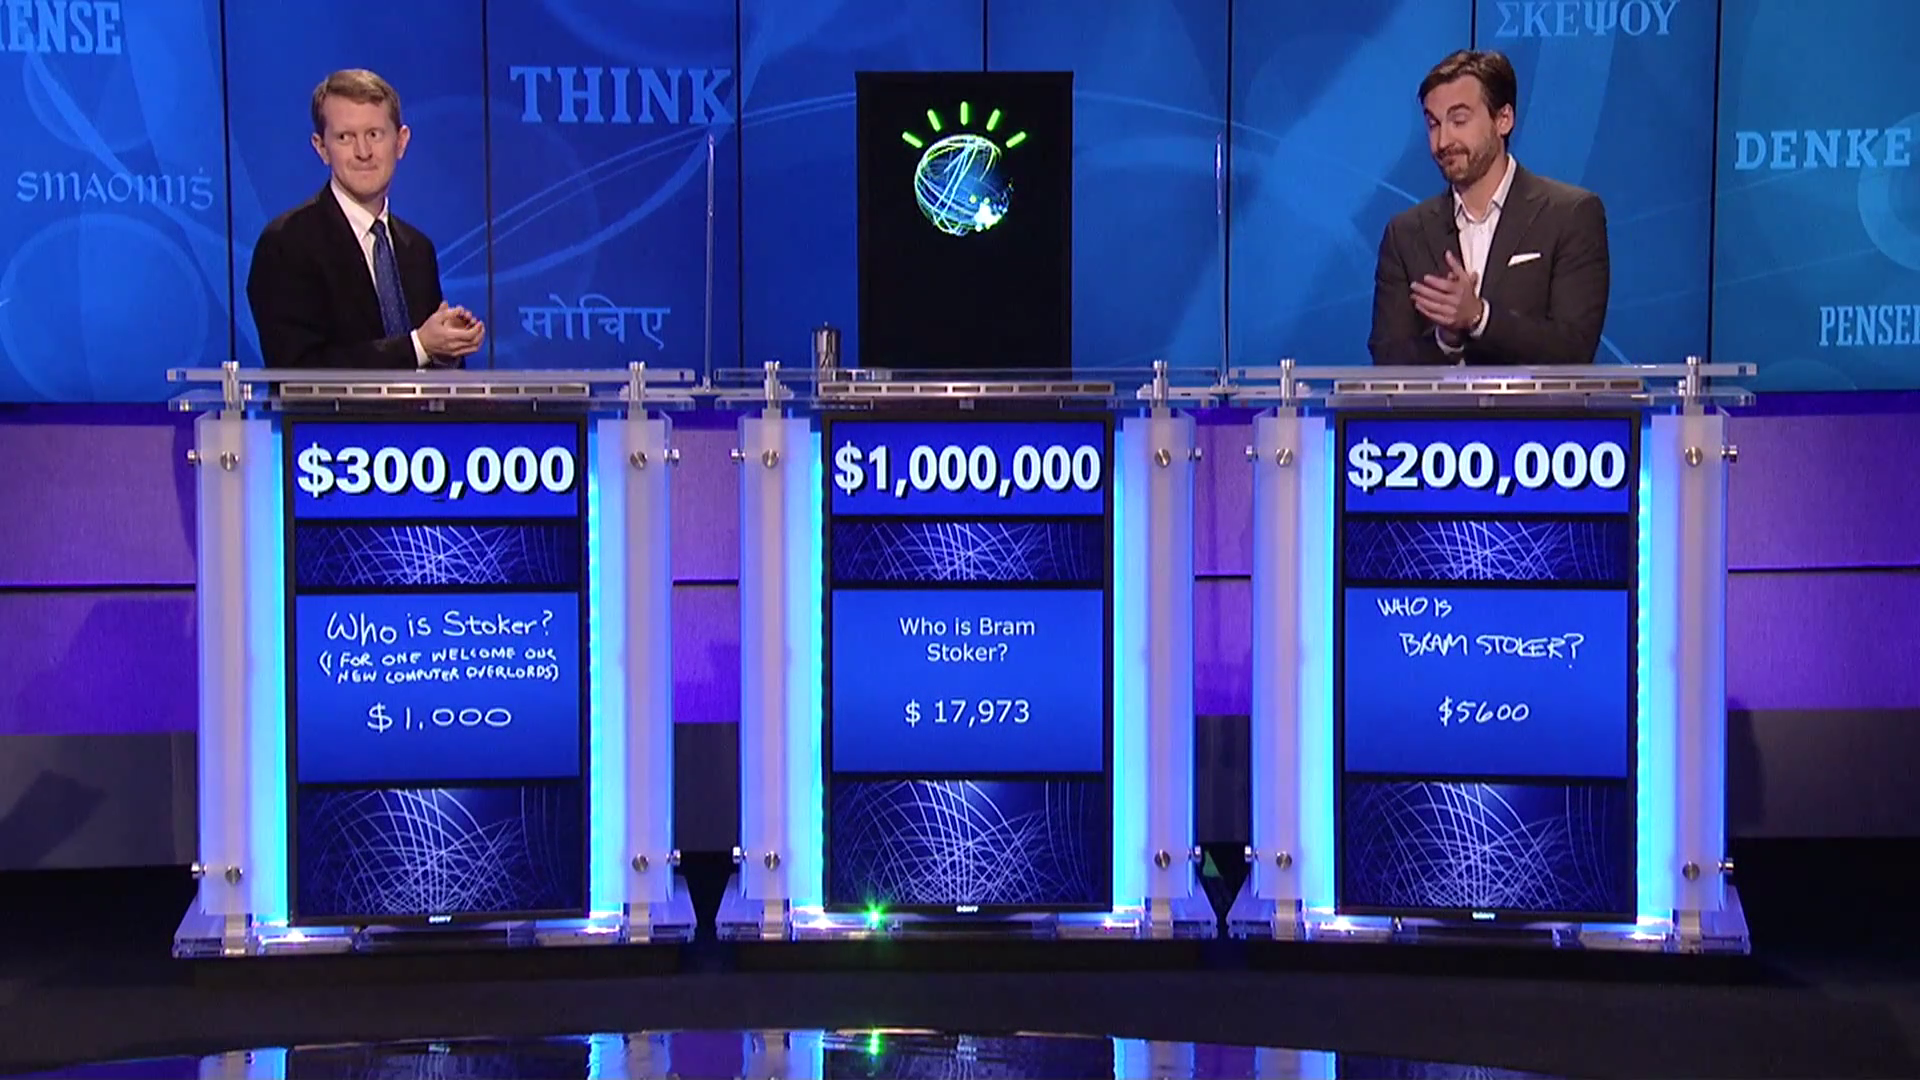 Two 'Jeopardy!' champions, Ken Jennings, left, and Brad Rutter, competed against IBM's Watson supercomputer, which proved adept at buzzing in quickly, as bouts were taped at the IBM research center in Yorktown Heights, New York, and February 16, 2011 was the broadcasting date of the final episode.